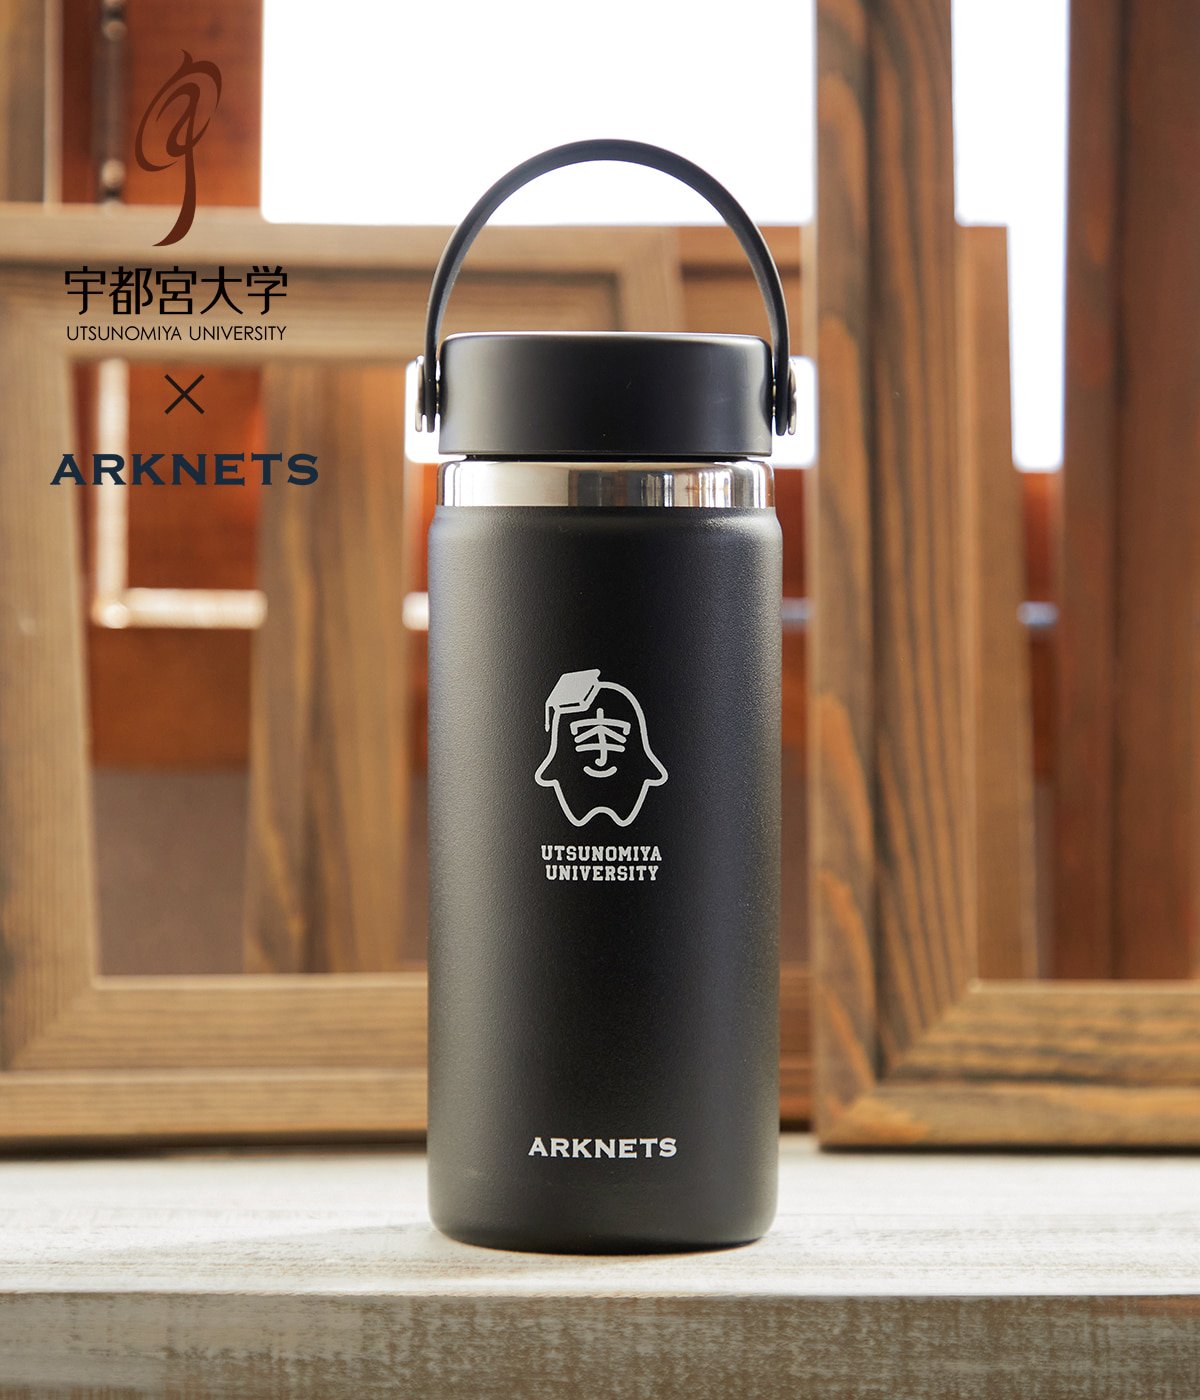 ONLY ARK】宇都宮大学×ARKnets×Hydro Flask コラボレーション 